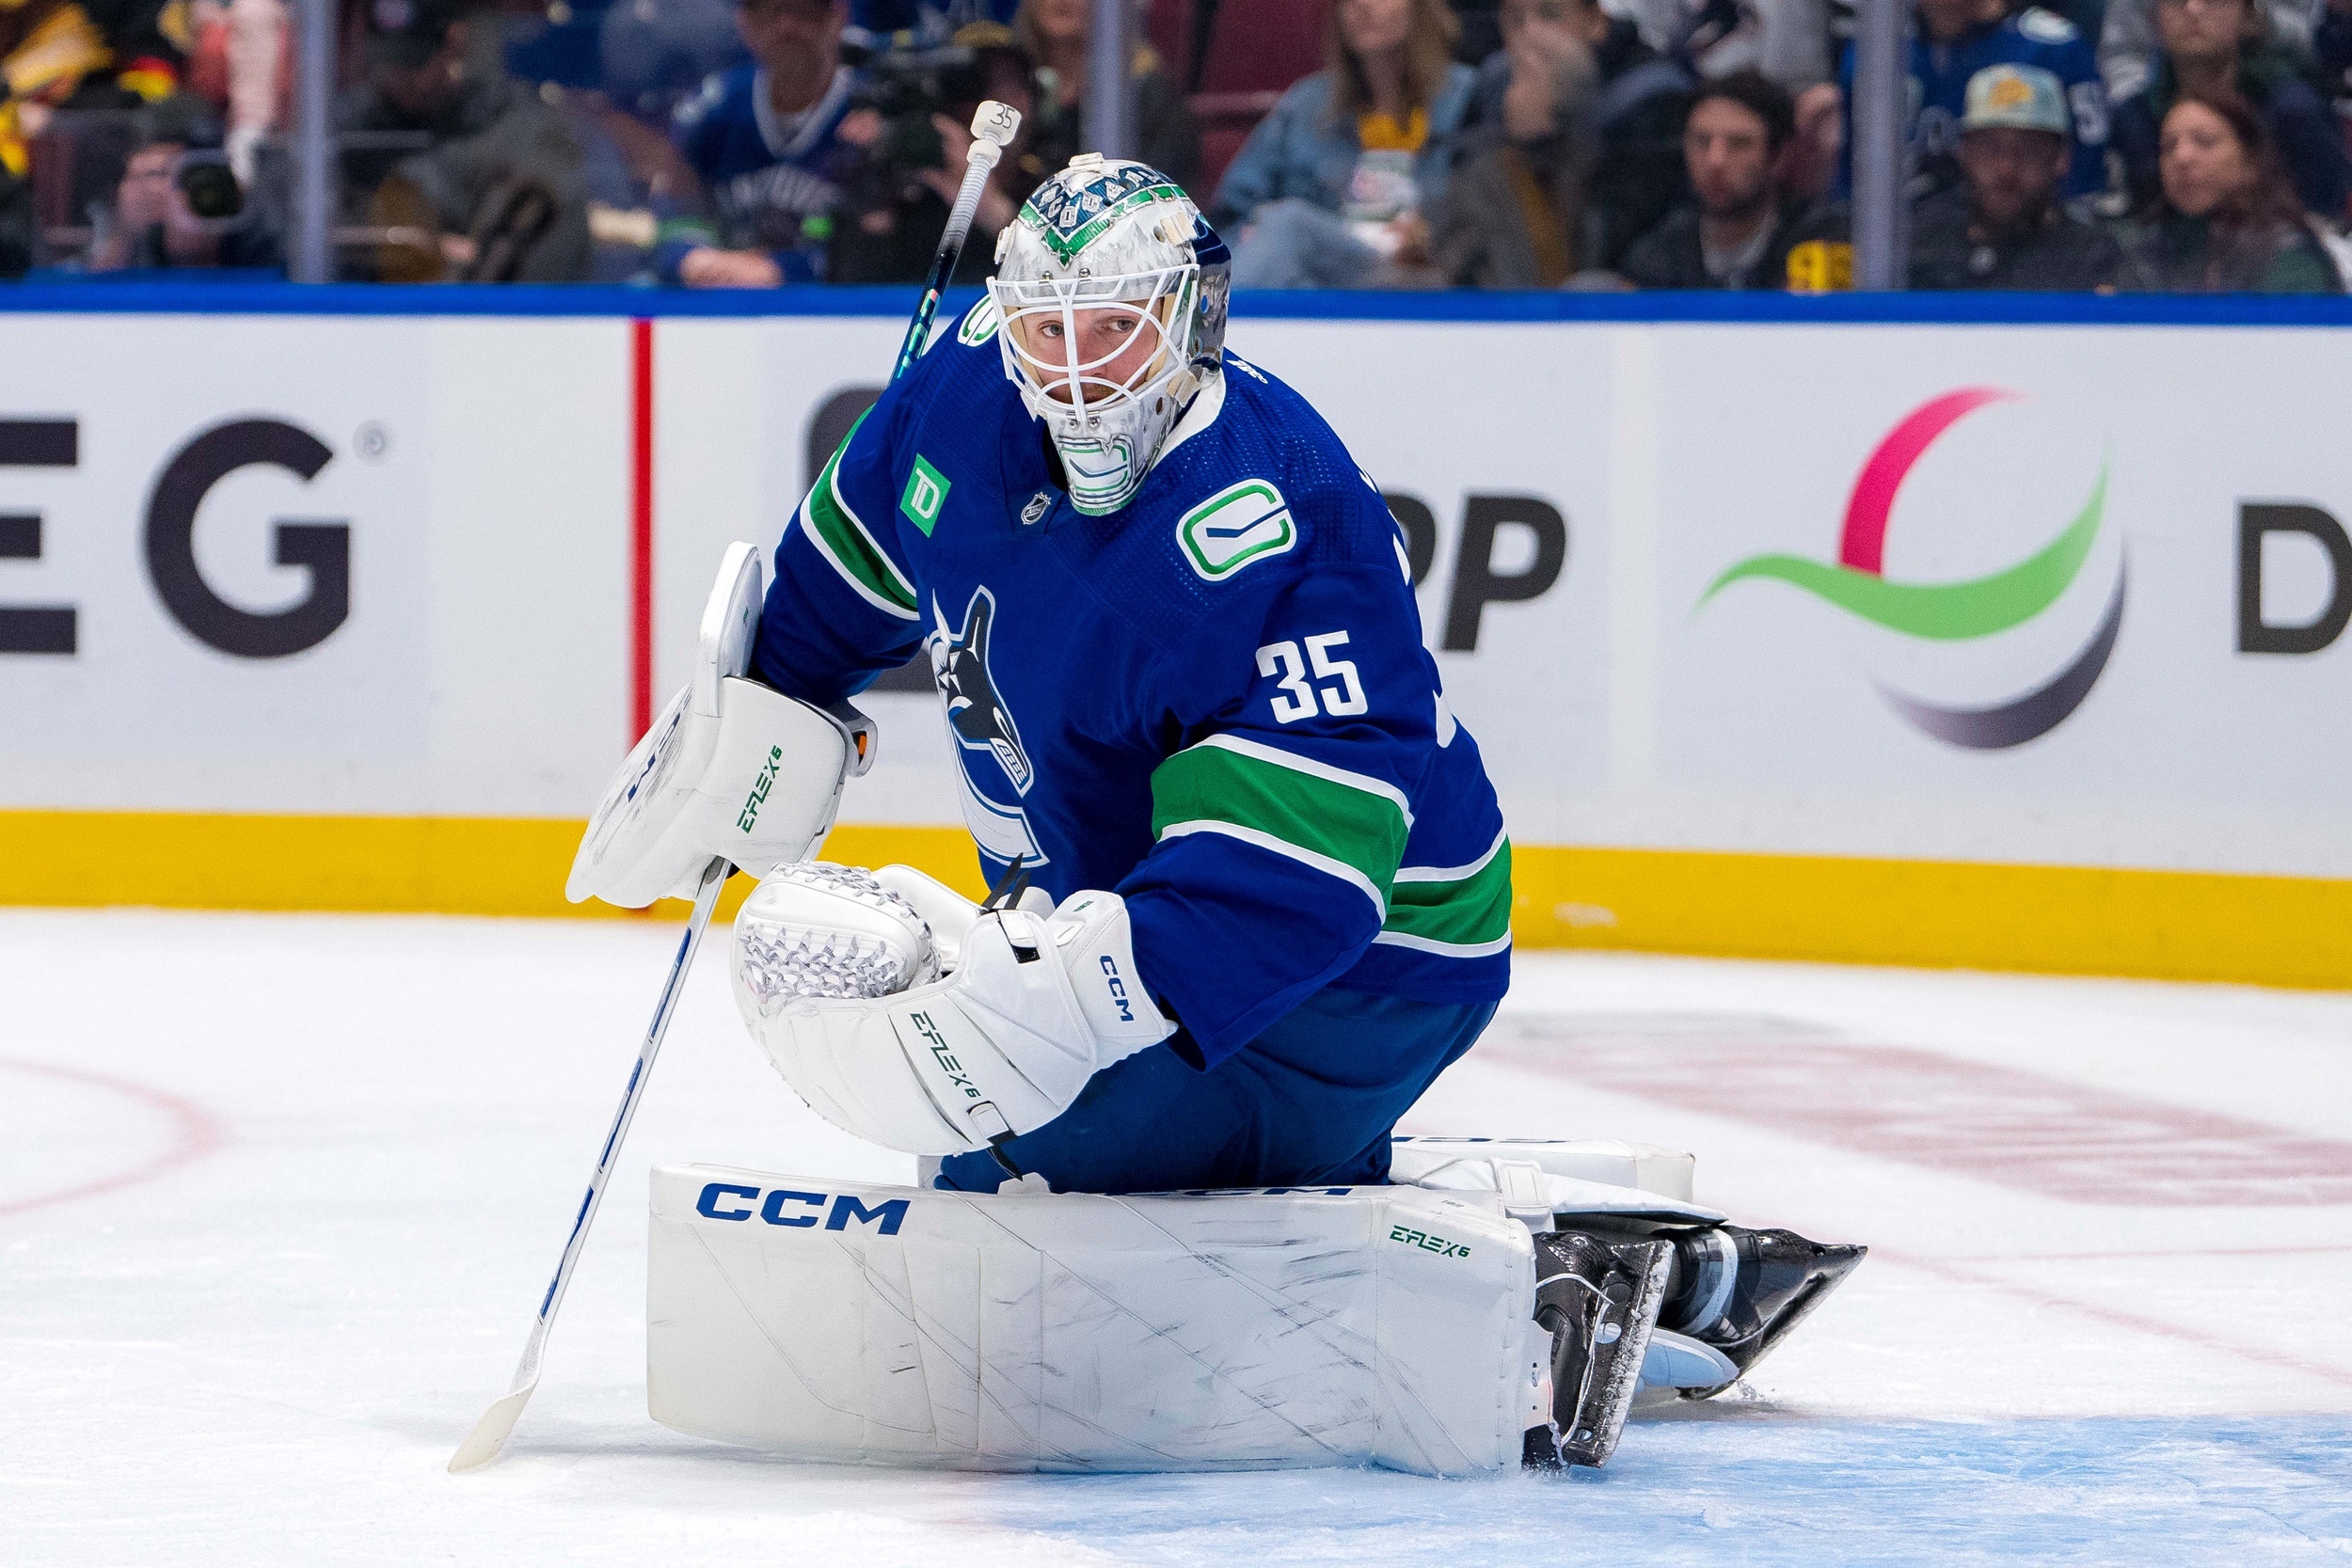 canucks goalie remains sidelined due to injury